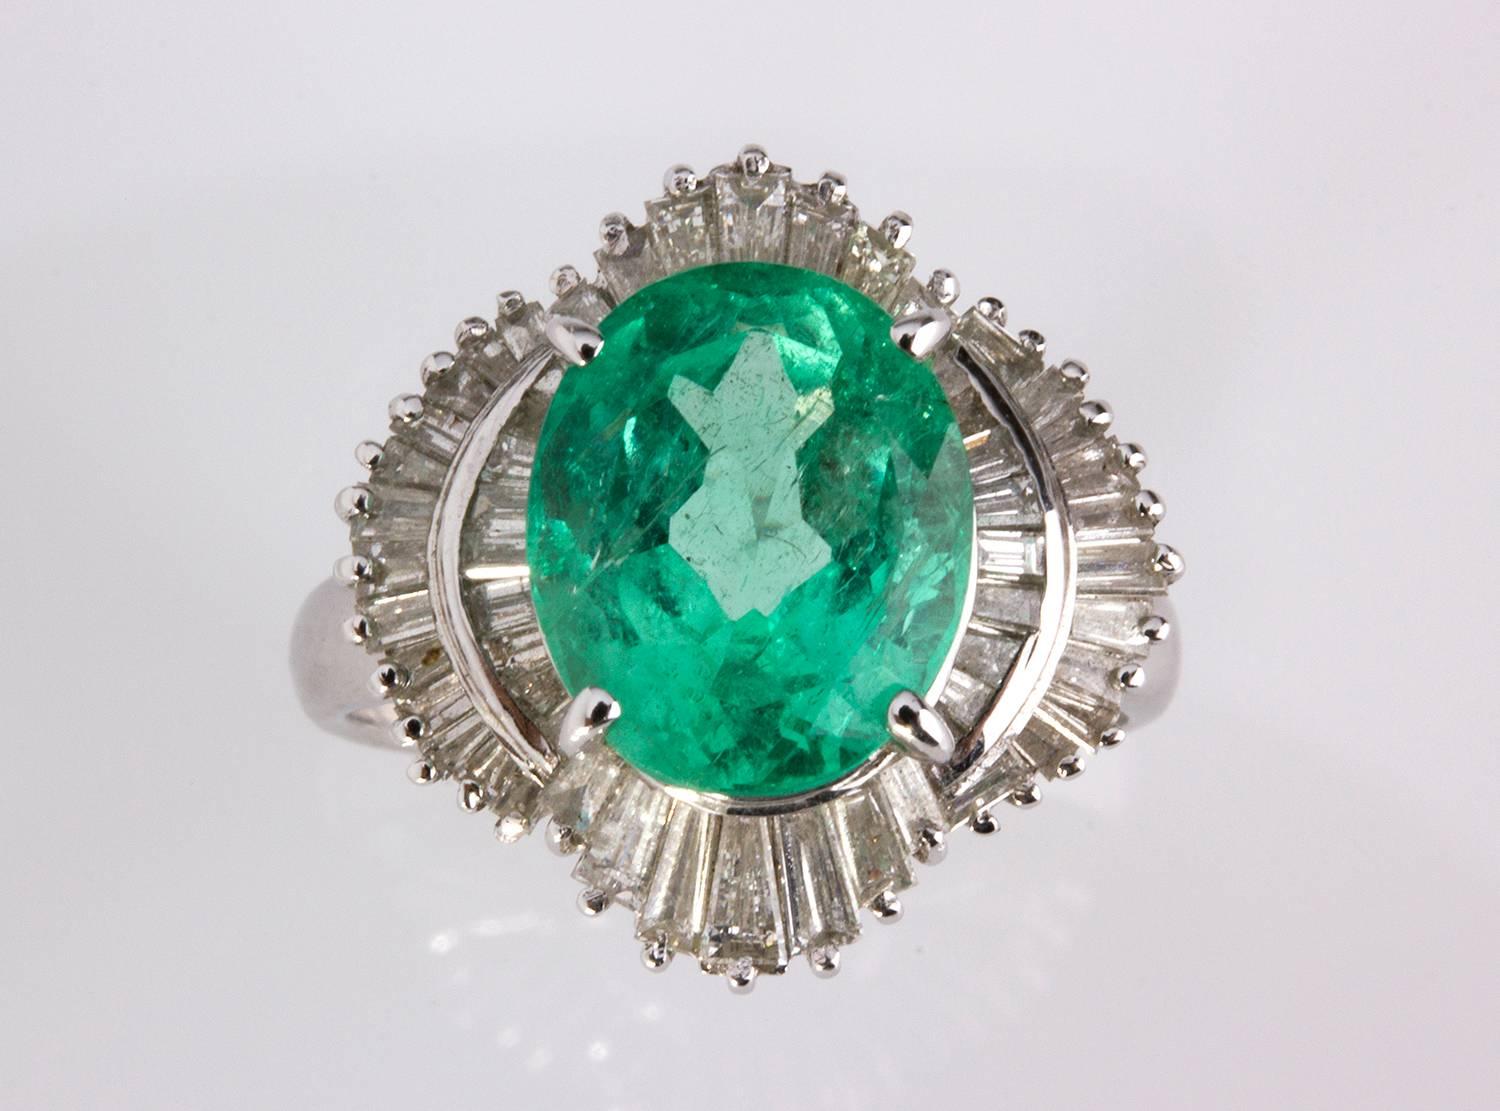 Set with an oval cut emerald weighing 3.67 ct, framed by baguette and tapered cut diamonds. Size US 6. Weight 6.2 gr. Item condition grading: **** good.